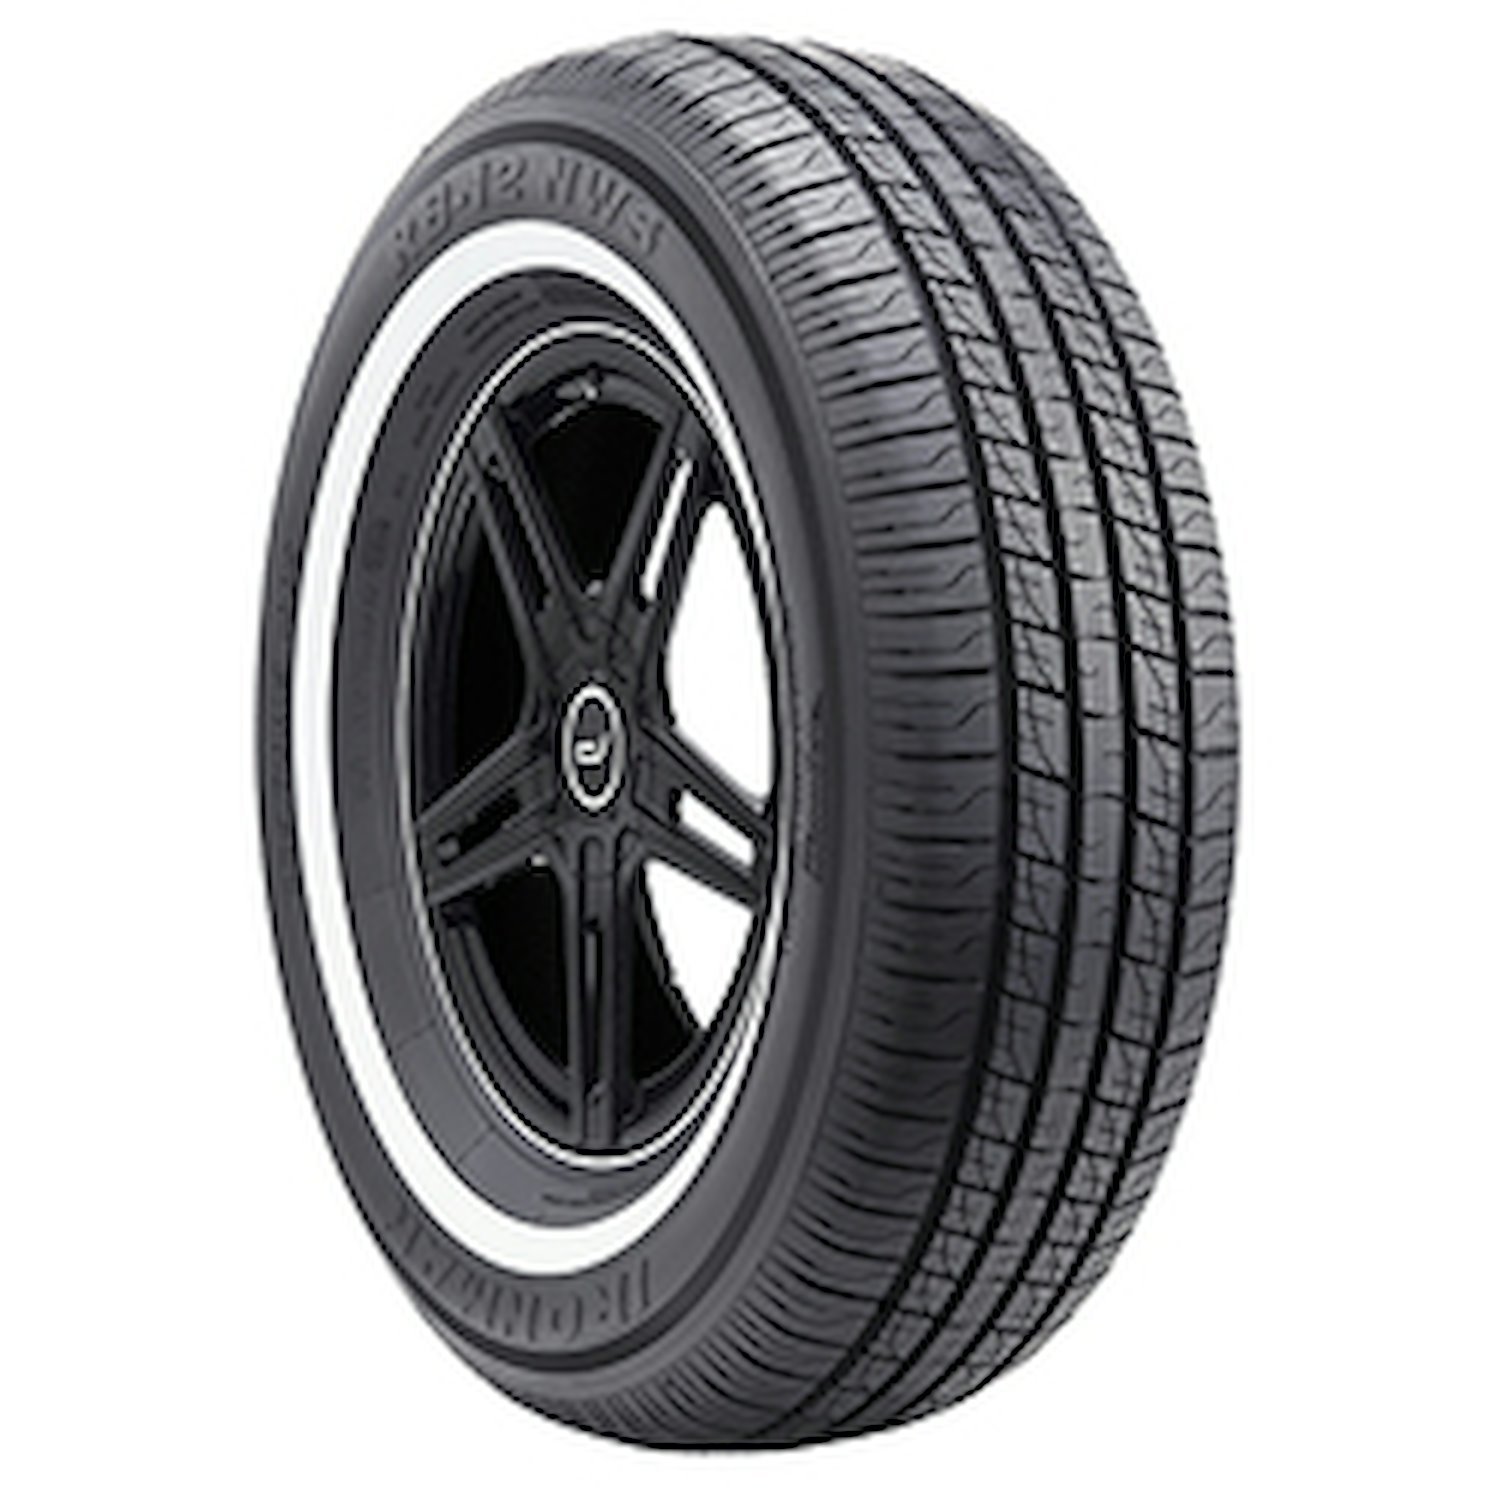 RB-12 NWS Tire, 225/70R15 100S